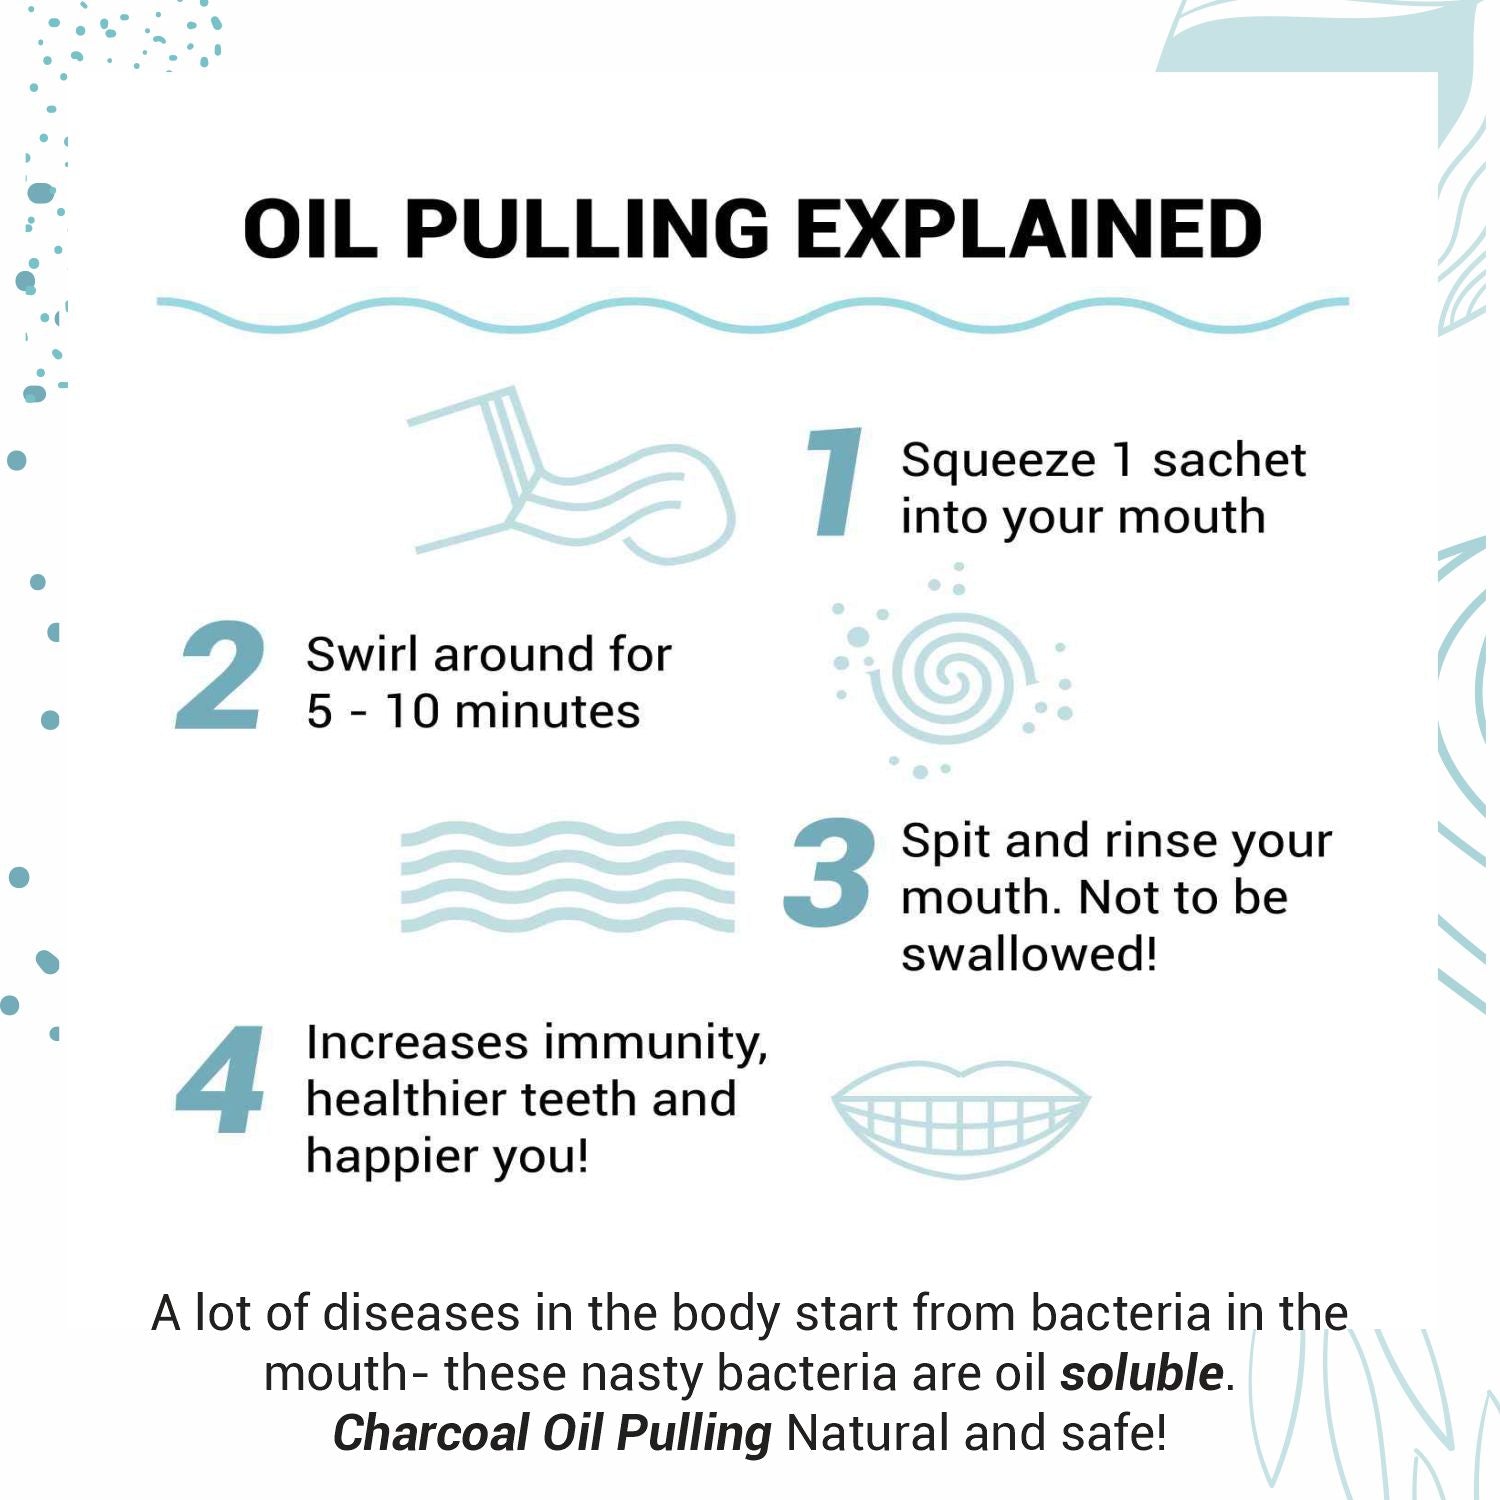 Cureveda Sparkle : Oil Pulling with Coconut Oil